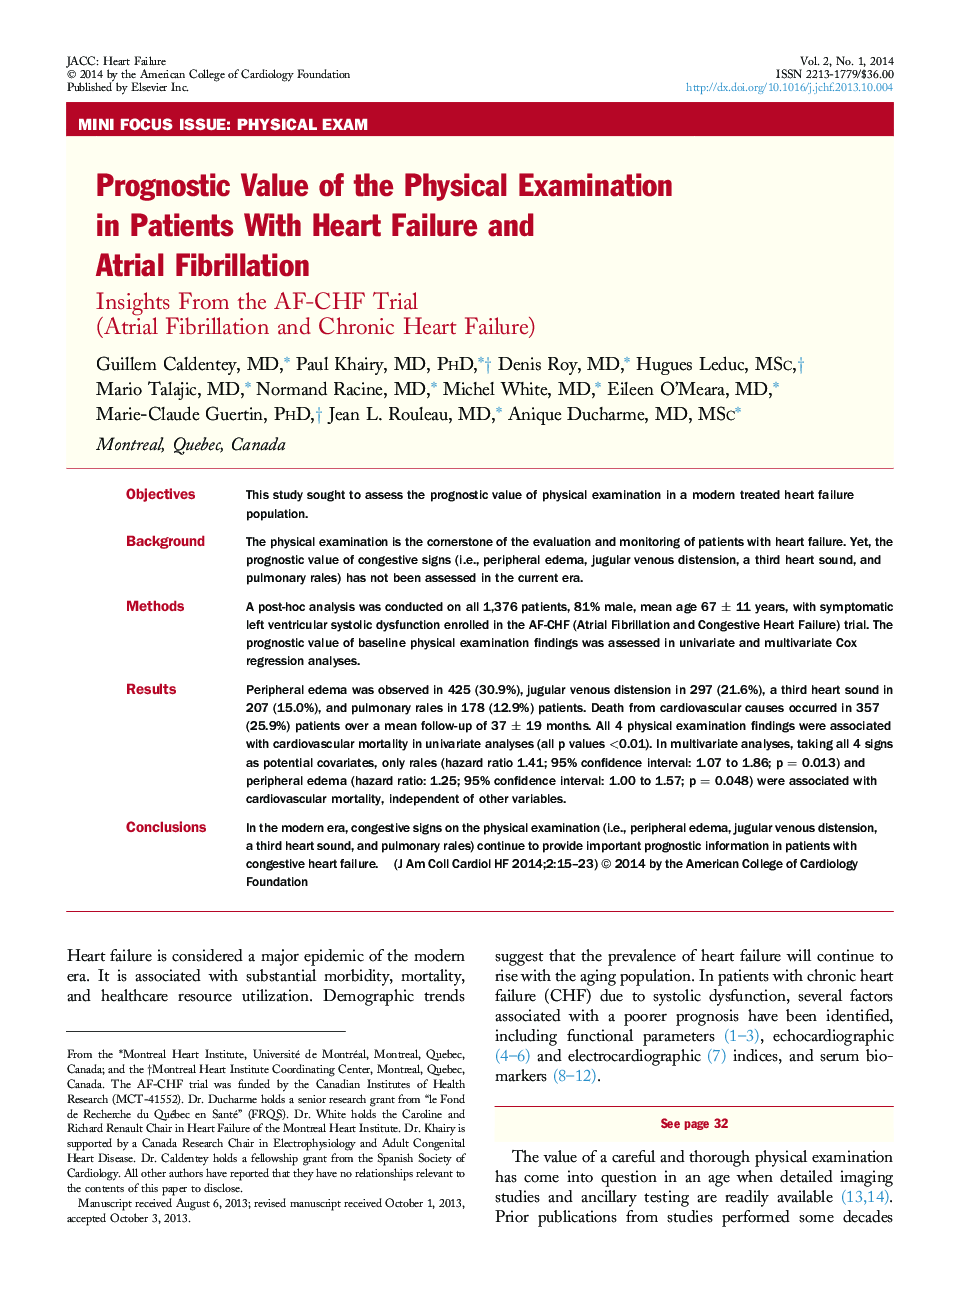 Prognostic Value of the Physical Examination in Patients With Heart Failure and Atrial Fibrillation : Insights From the AF-CHF Trial (Atrial Fibrillation and Chronic Heart Failure)